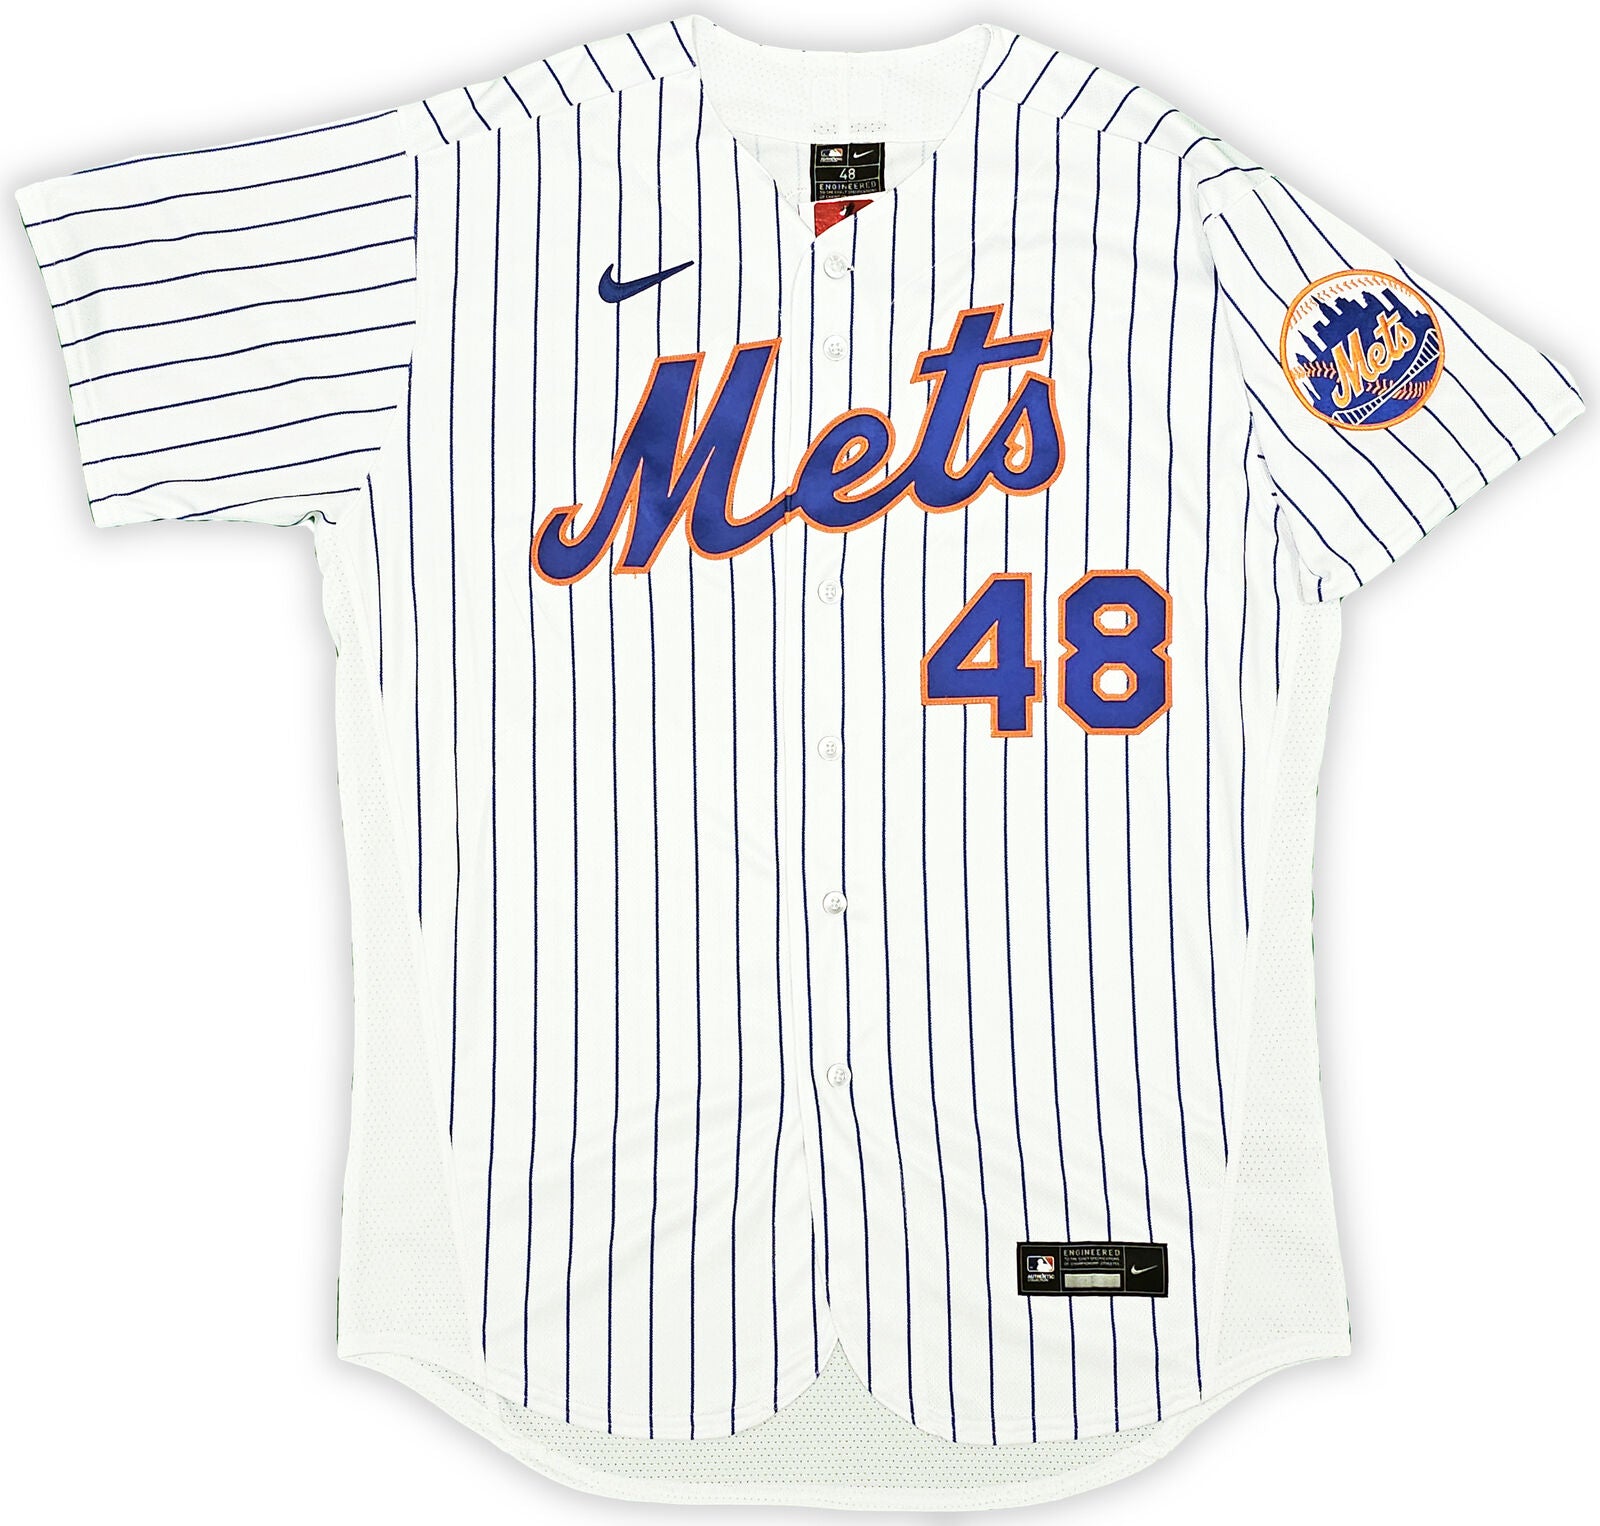 Mets Jacob deGrom Autographed Nike Authentic Jersey Size 44 18-19 NL Cy Fanatics